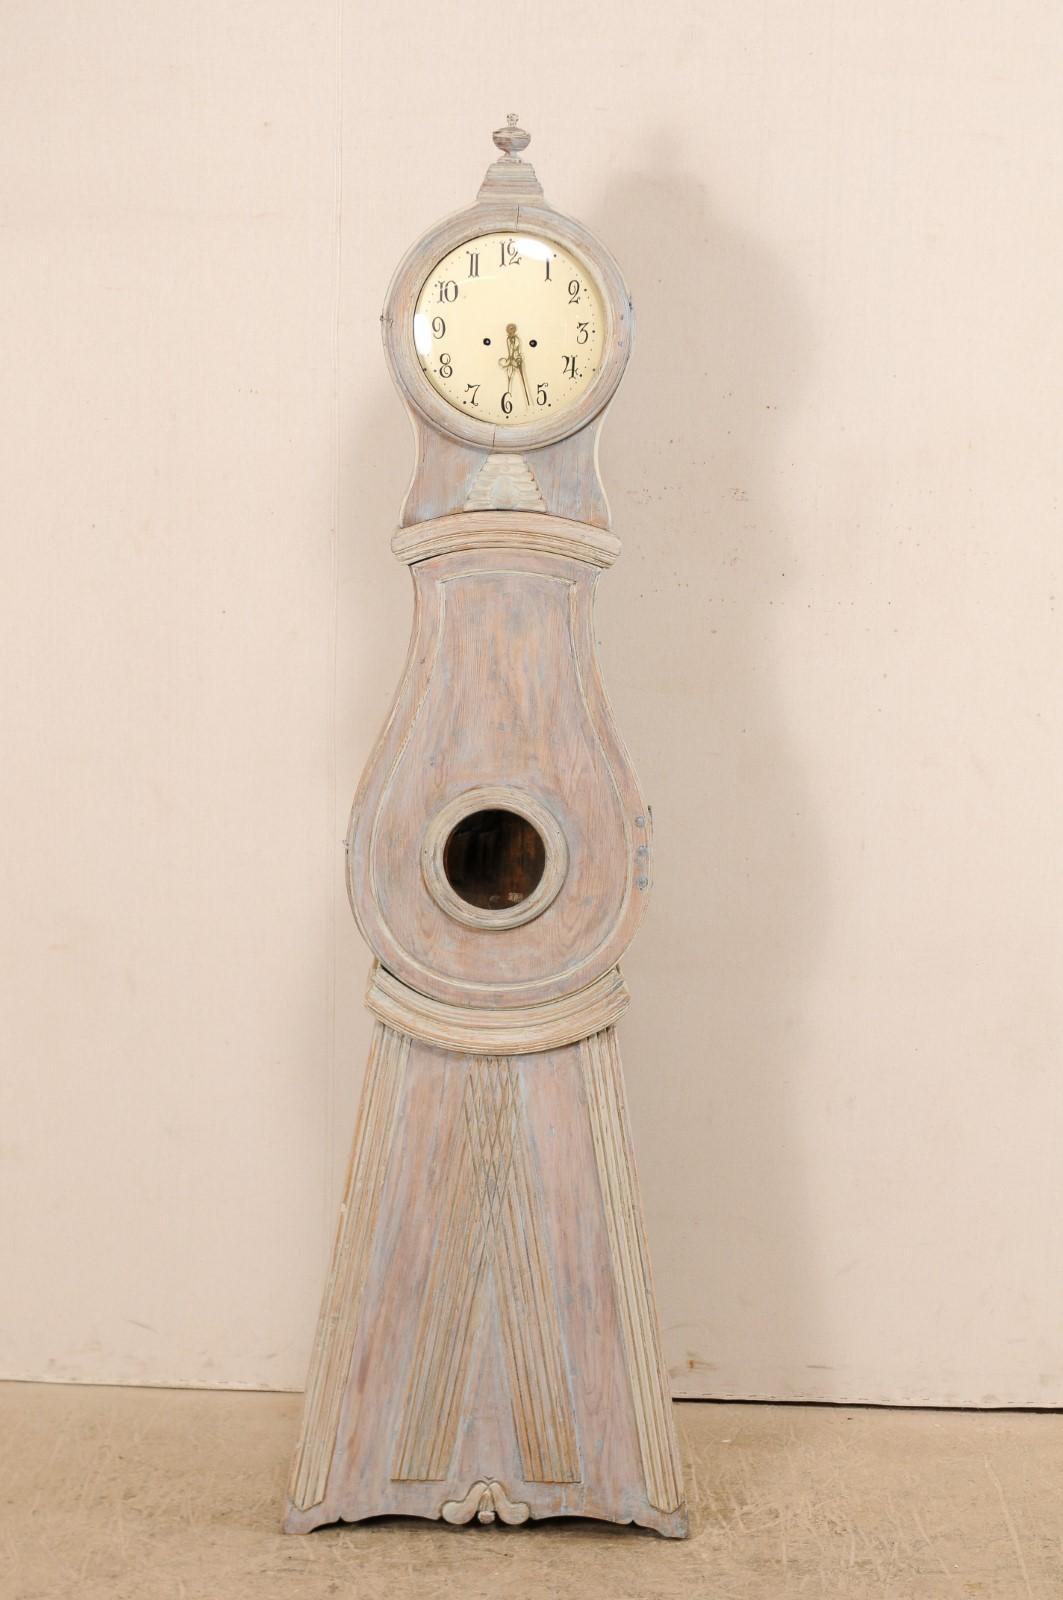 A 19th century Swedish grandfather clock. This Swedish clock features a round-shaped head which has been topped at crest with a carved finial, decorated neck at center, a raindrop shaped belly, with triangular bottom which has been carved in